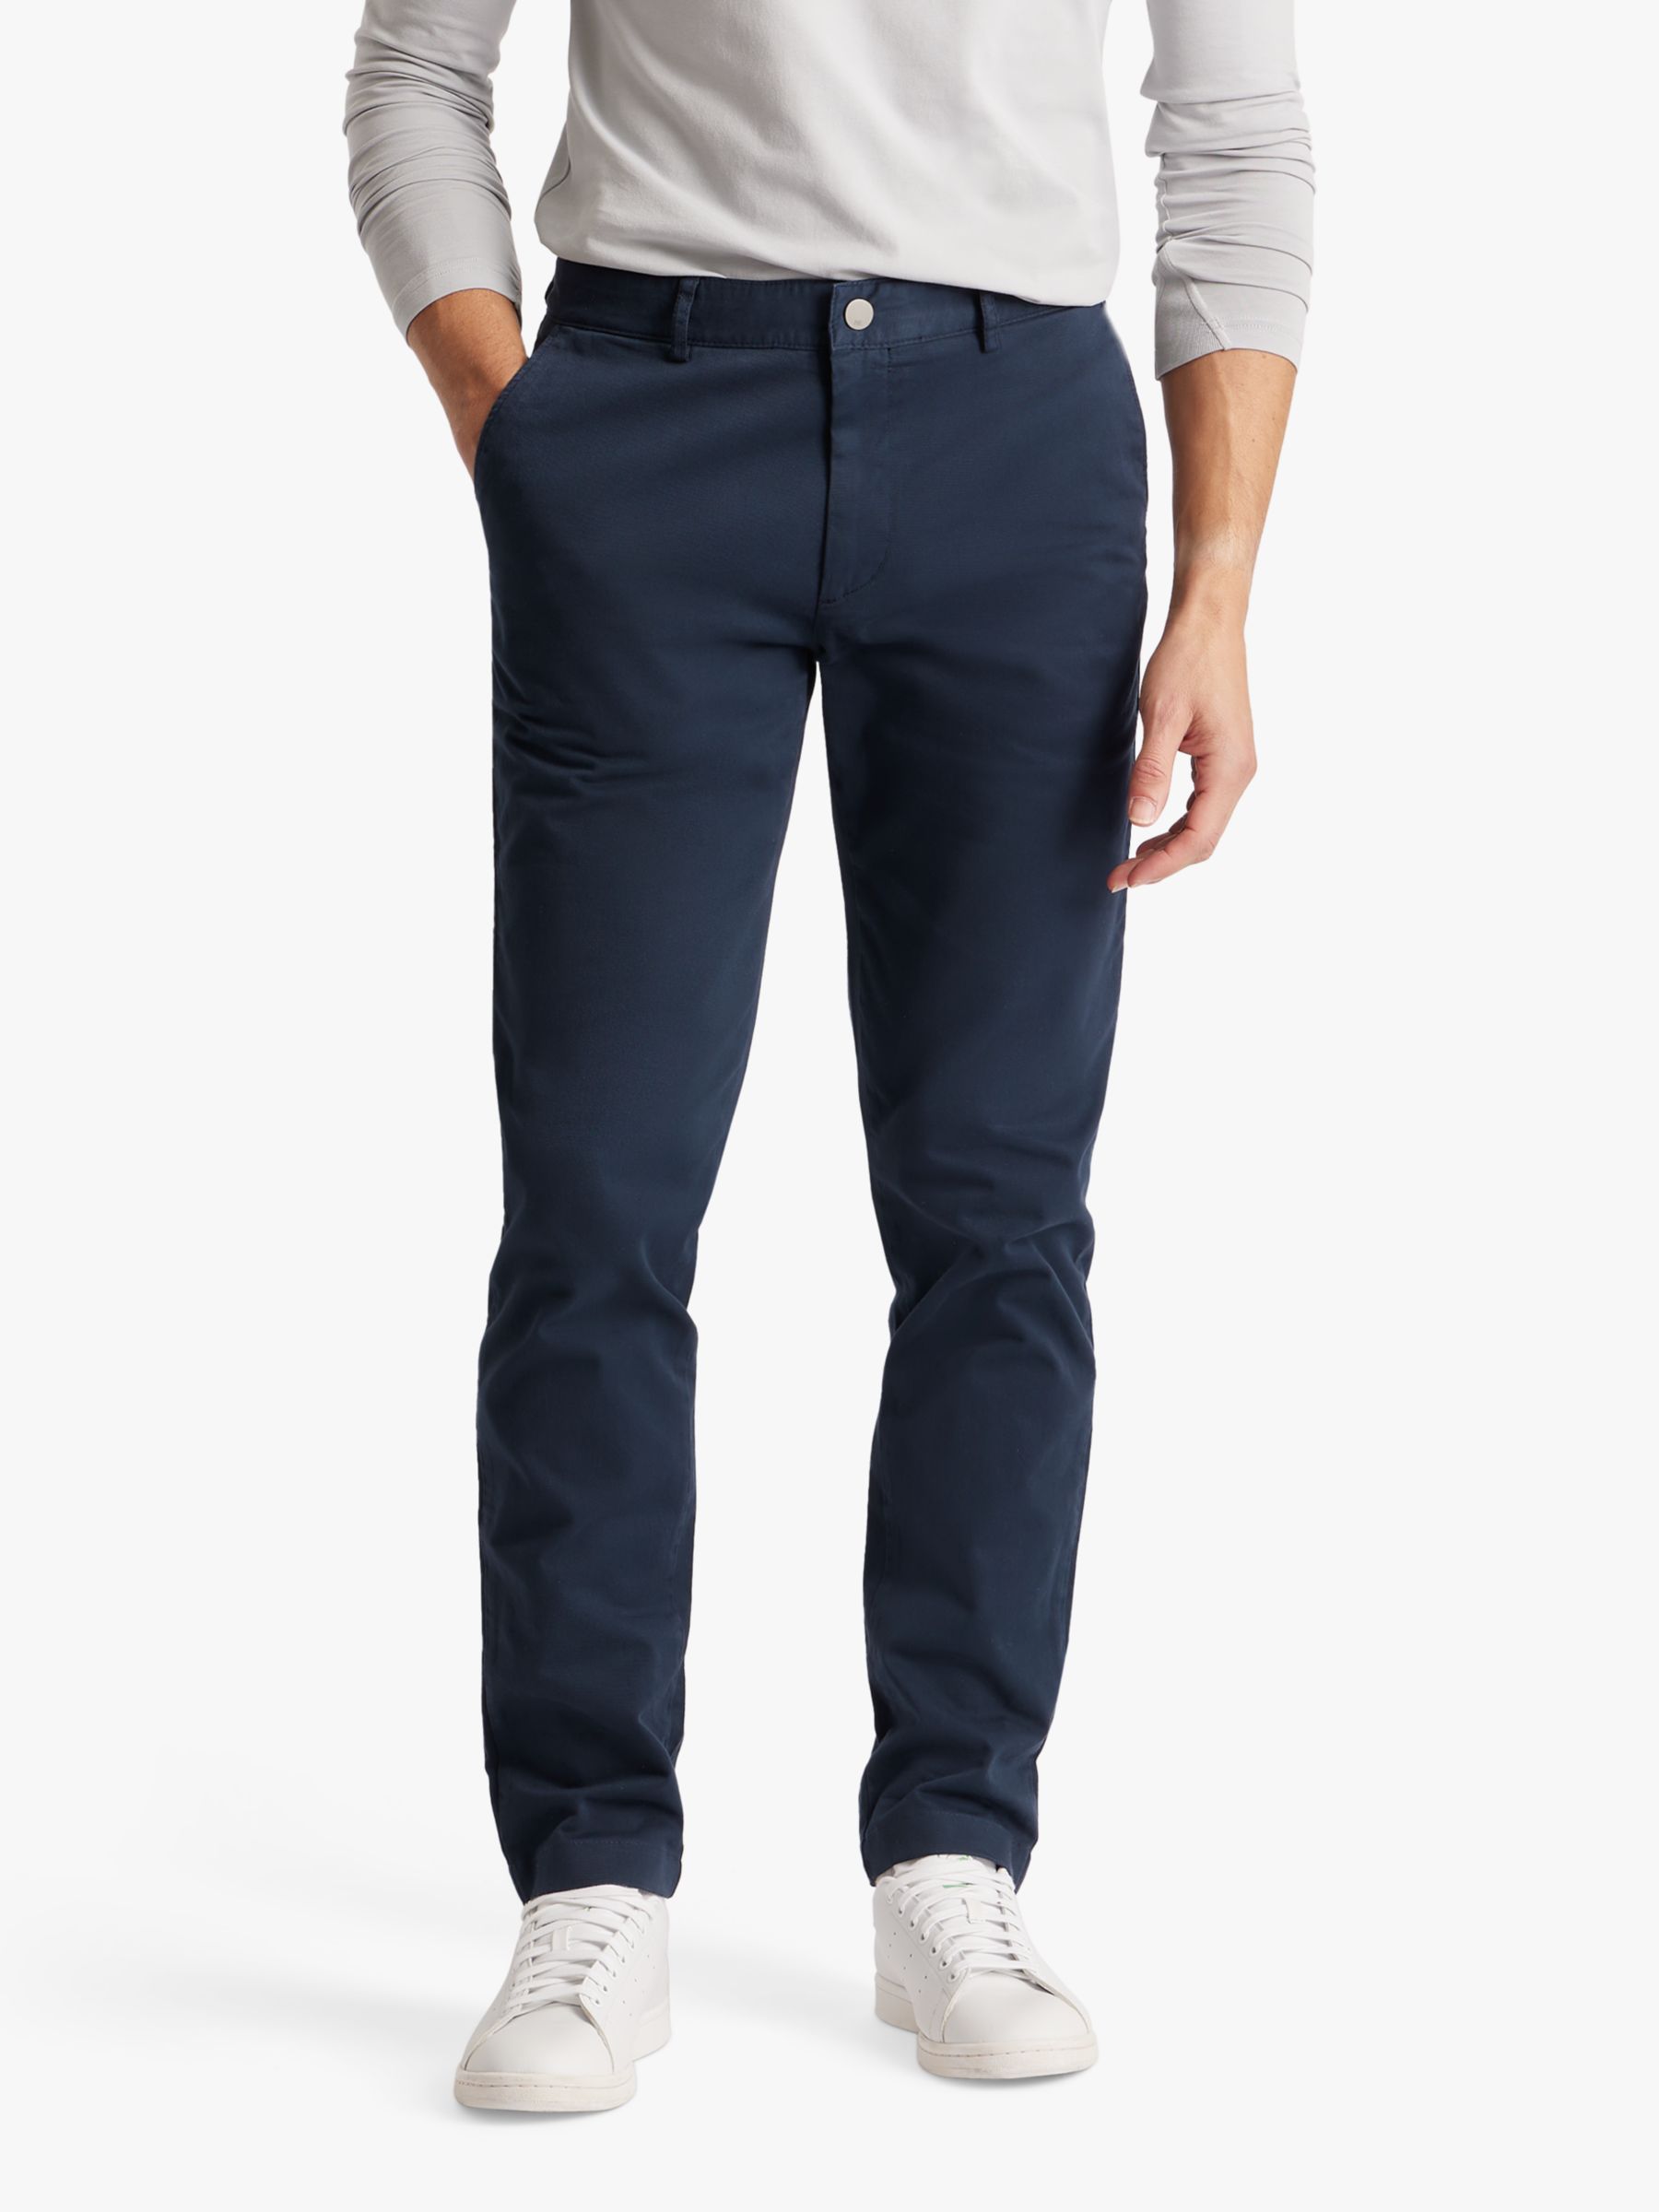 SPOKE Heroes Cotton Blend Broad Thigh Chinos, Navy, W38/L31